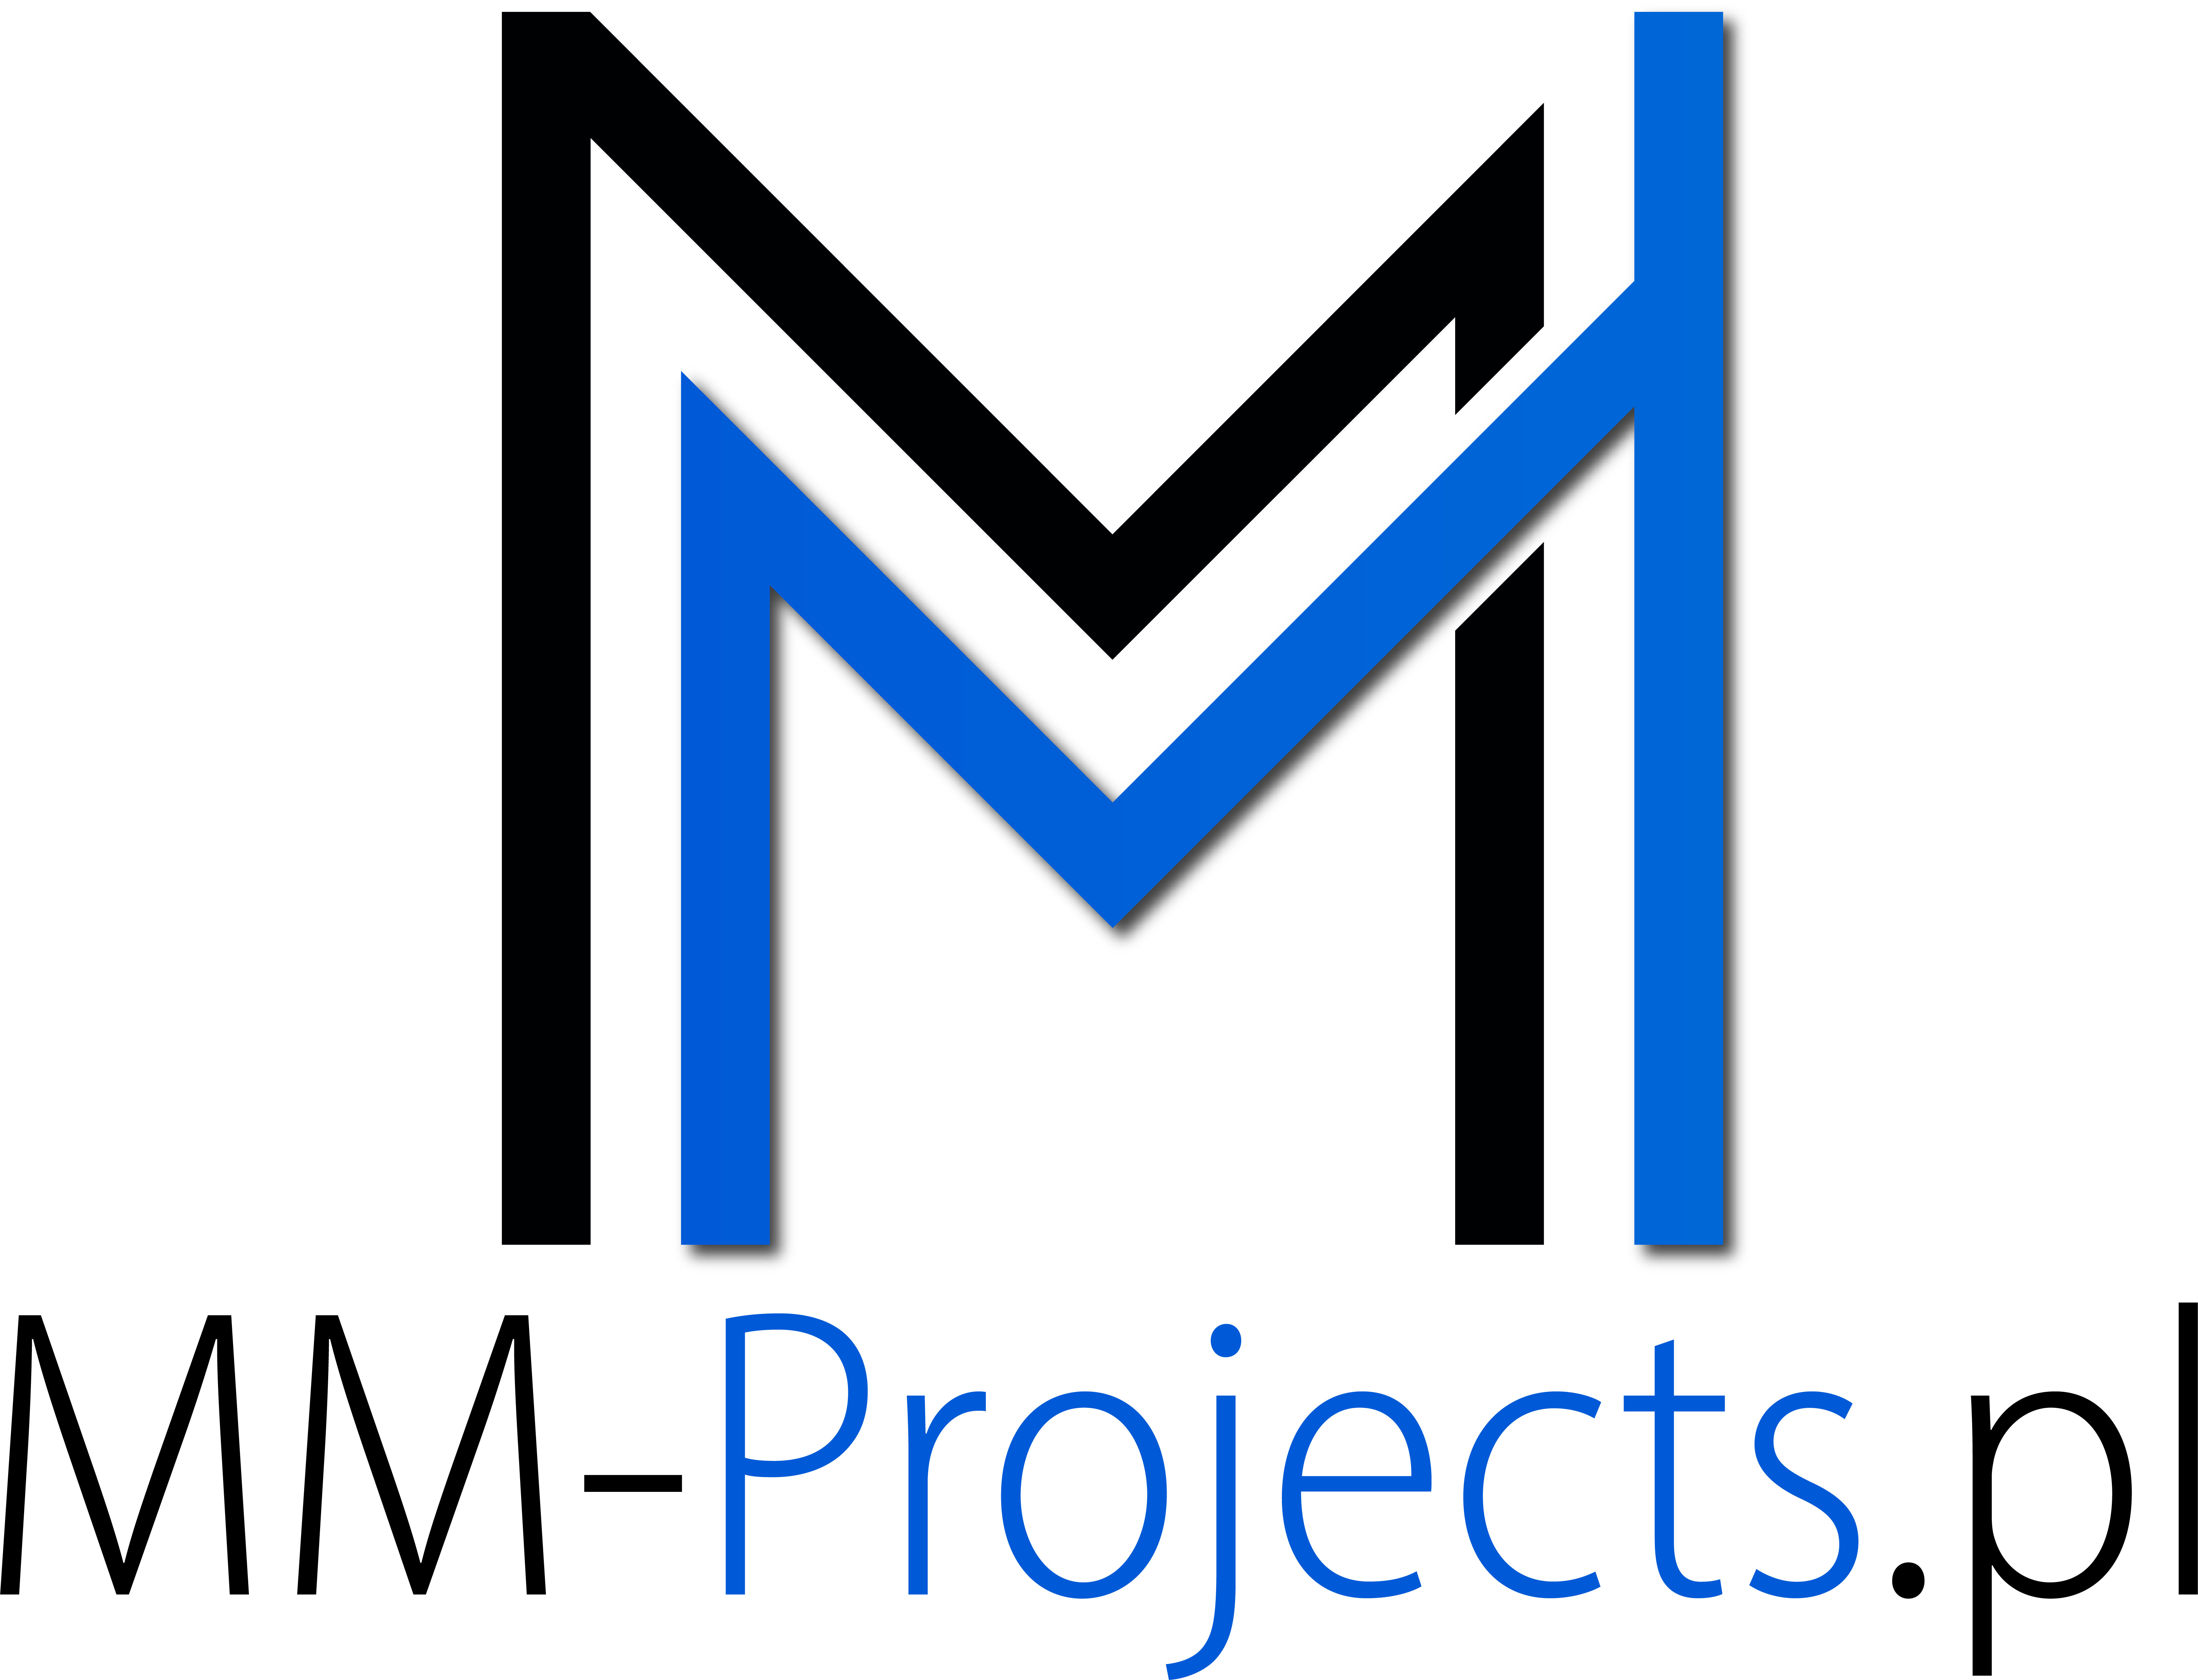 MM-Projects